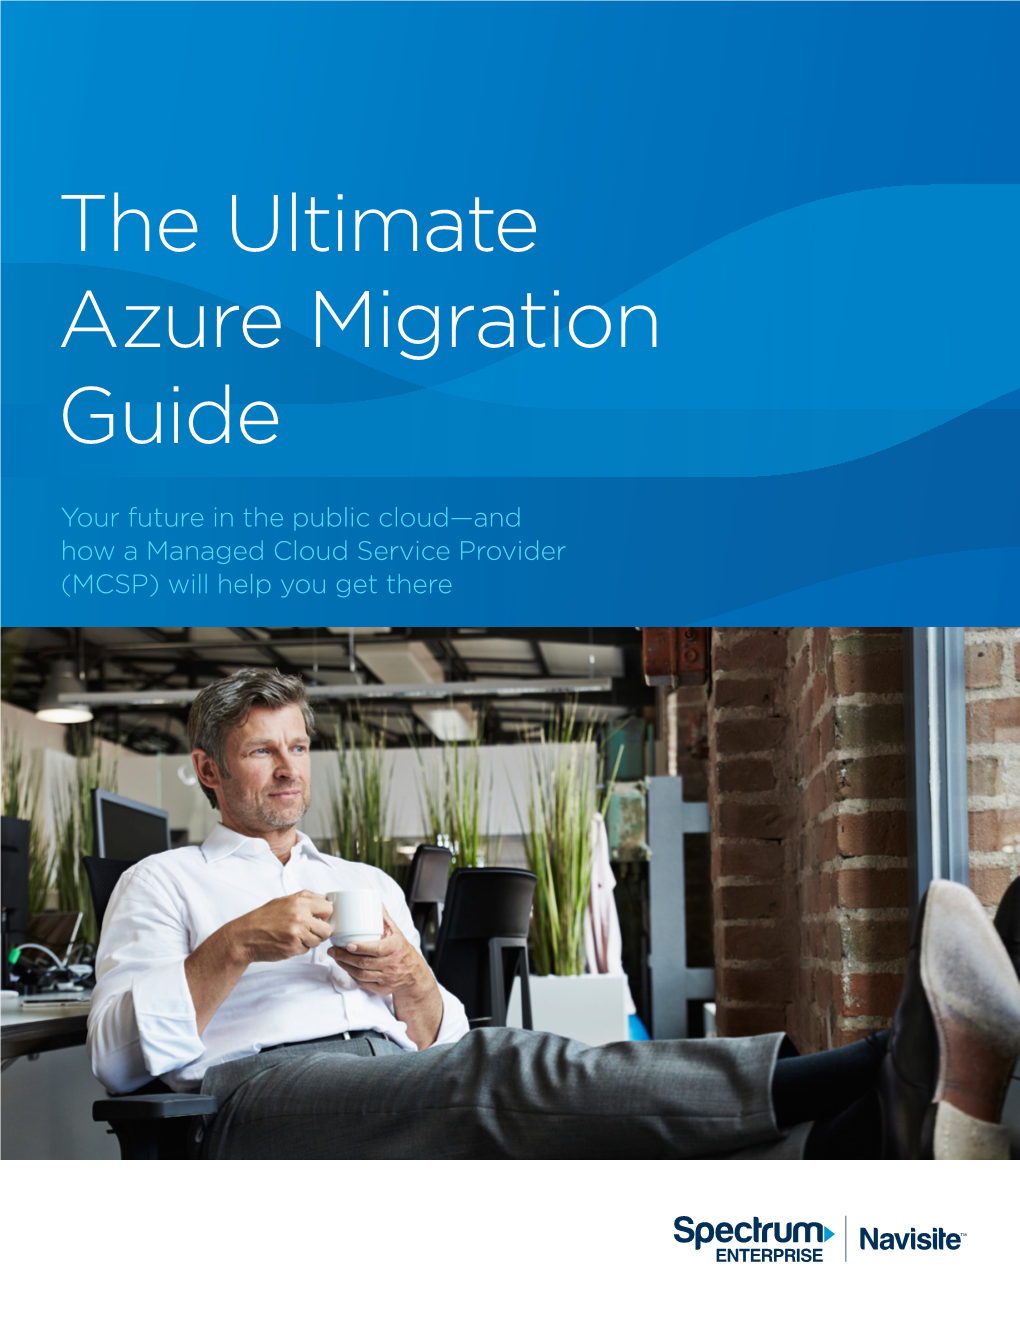 The Ultimate Azure Migration Guide